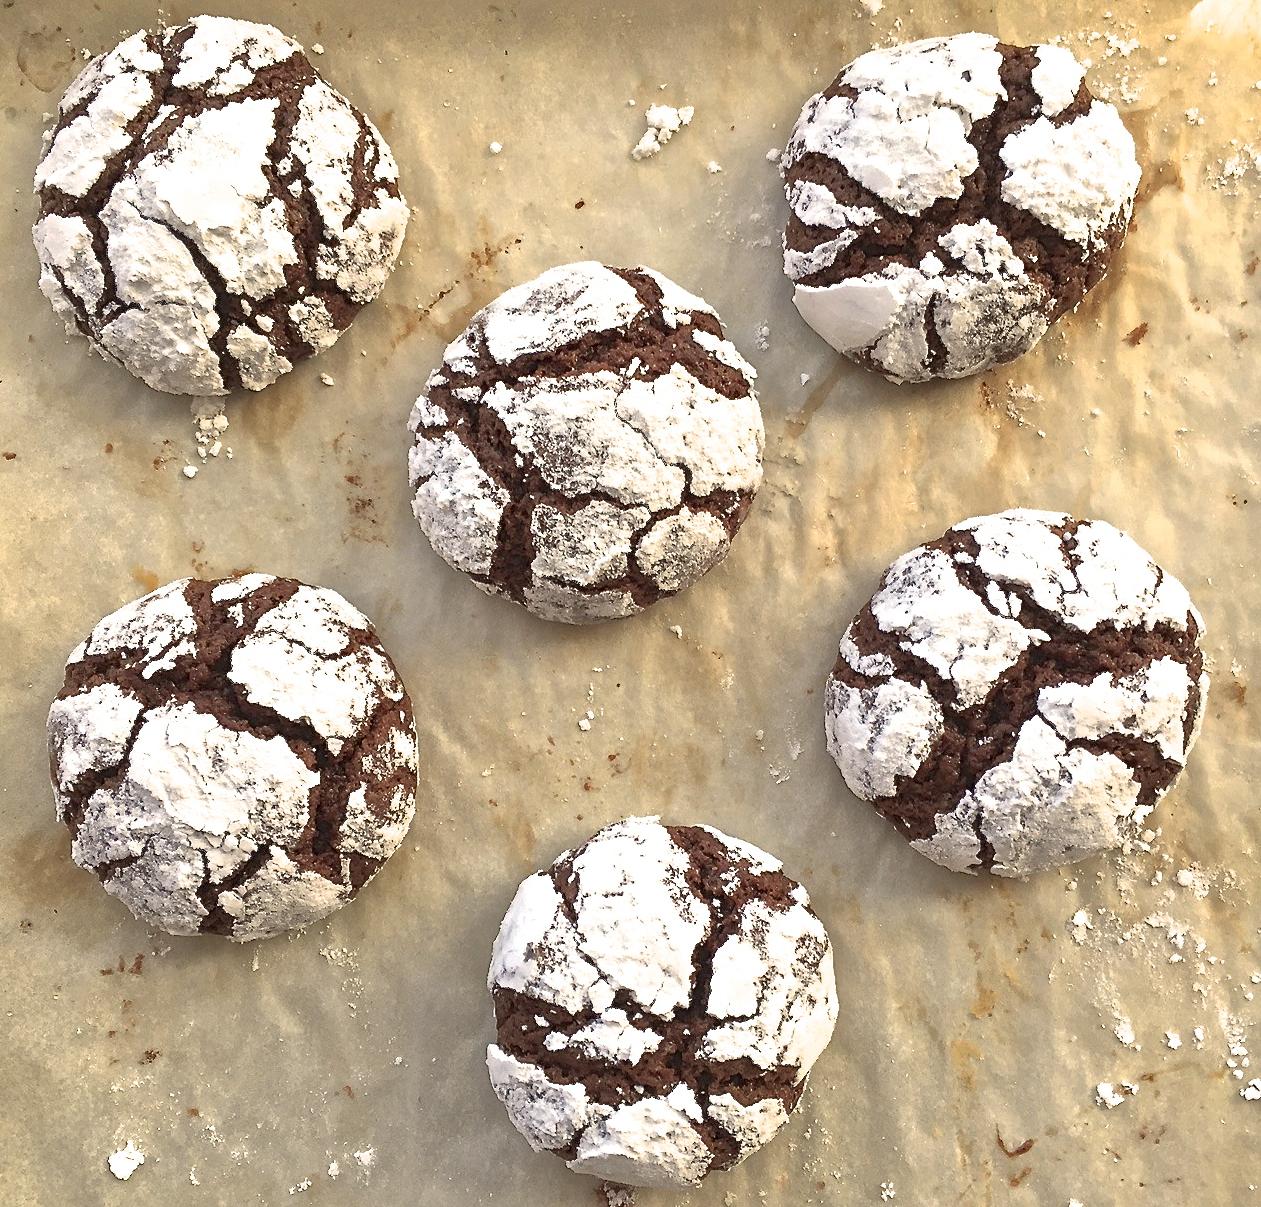  Ready to satisfy your sweet tooth? These melt-in-your-mouth Mocha Crinkles are just what you need.